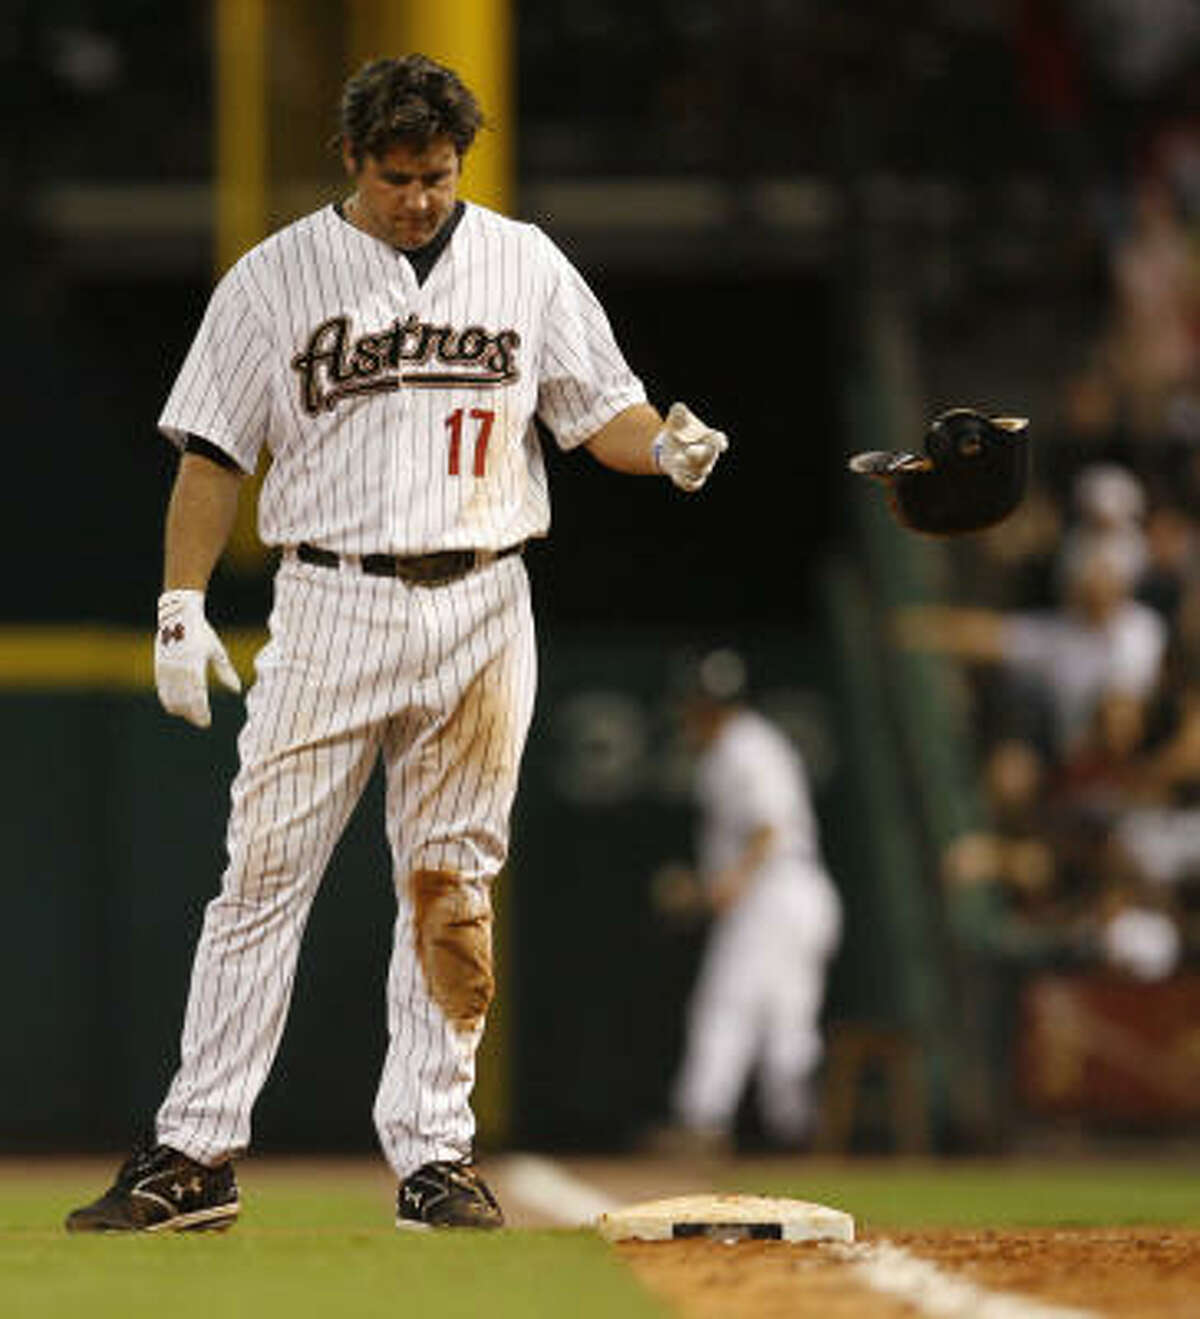 Lance Berkman sums up the Astros' season to date as 'fairly mediocre.'